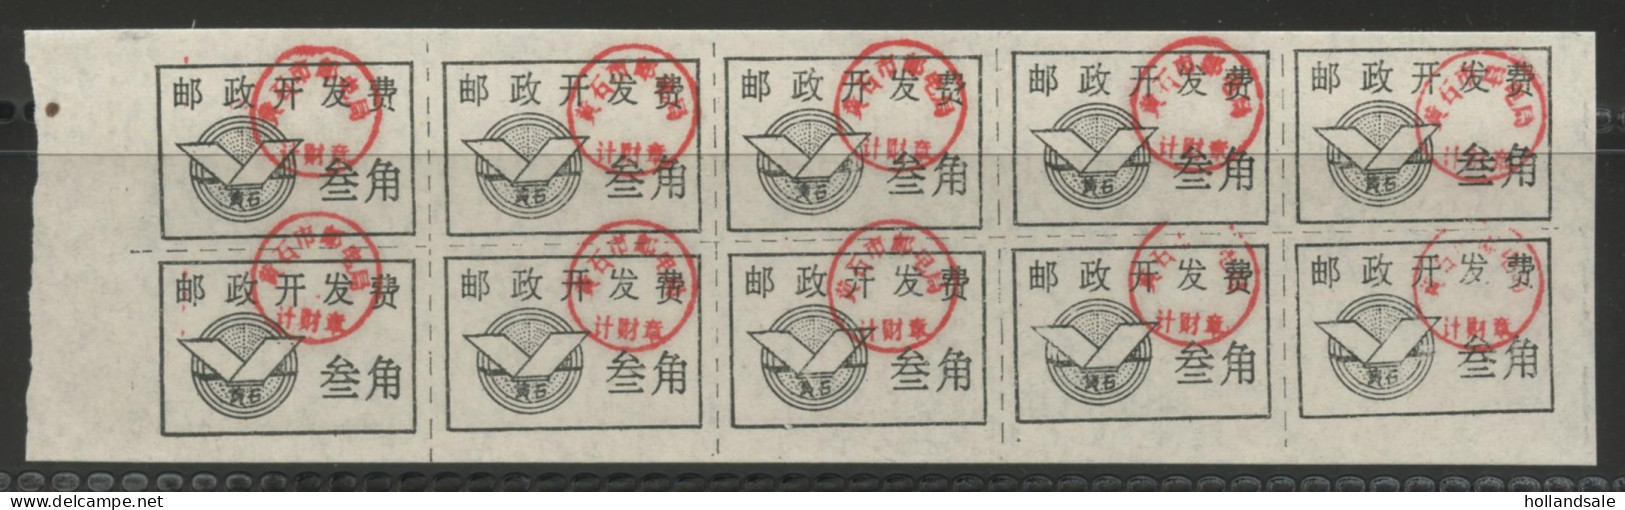 CHINA PRC / ADDED CHARGE - Labels Of Huangshi City, Hubei Prov. D&O 12-0167.  Block Of 10. - Segnatasse